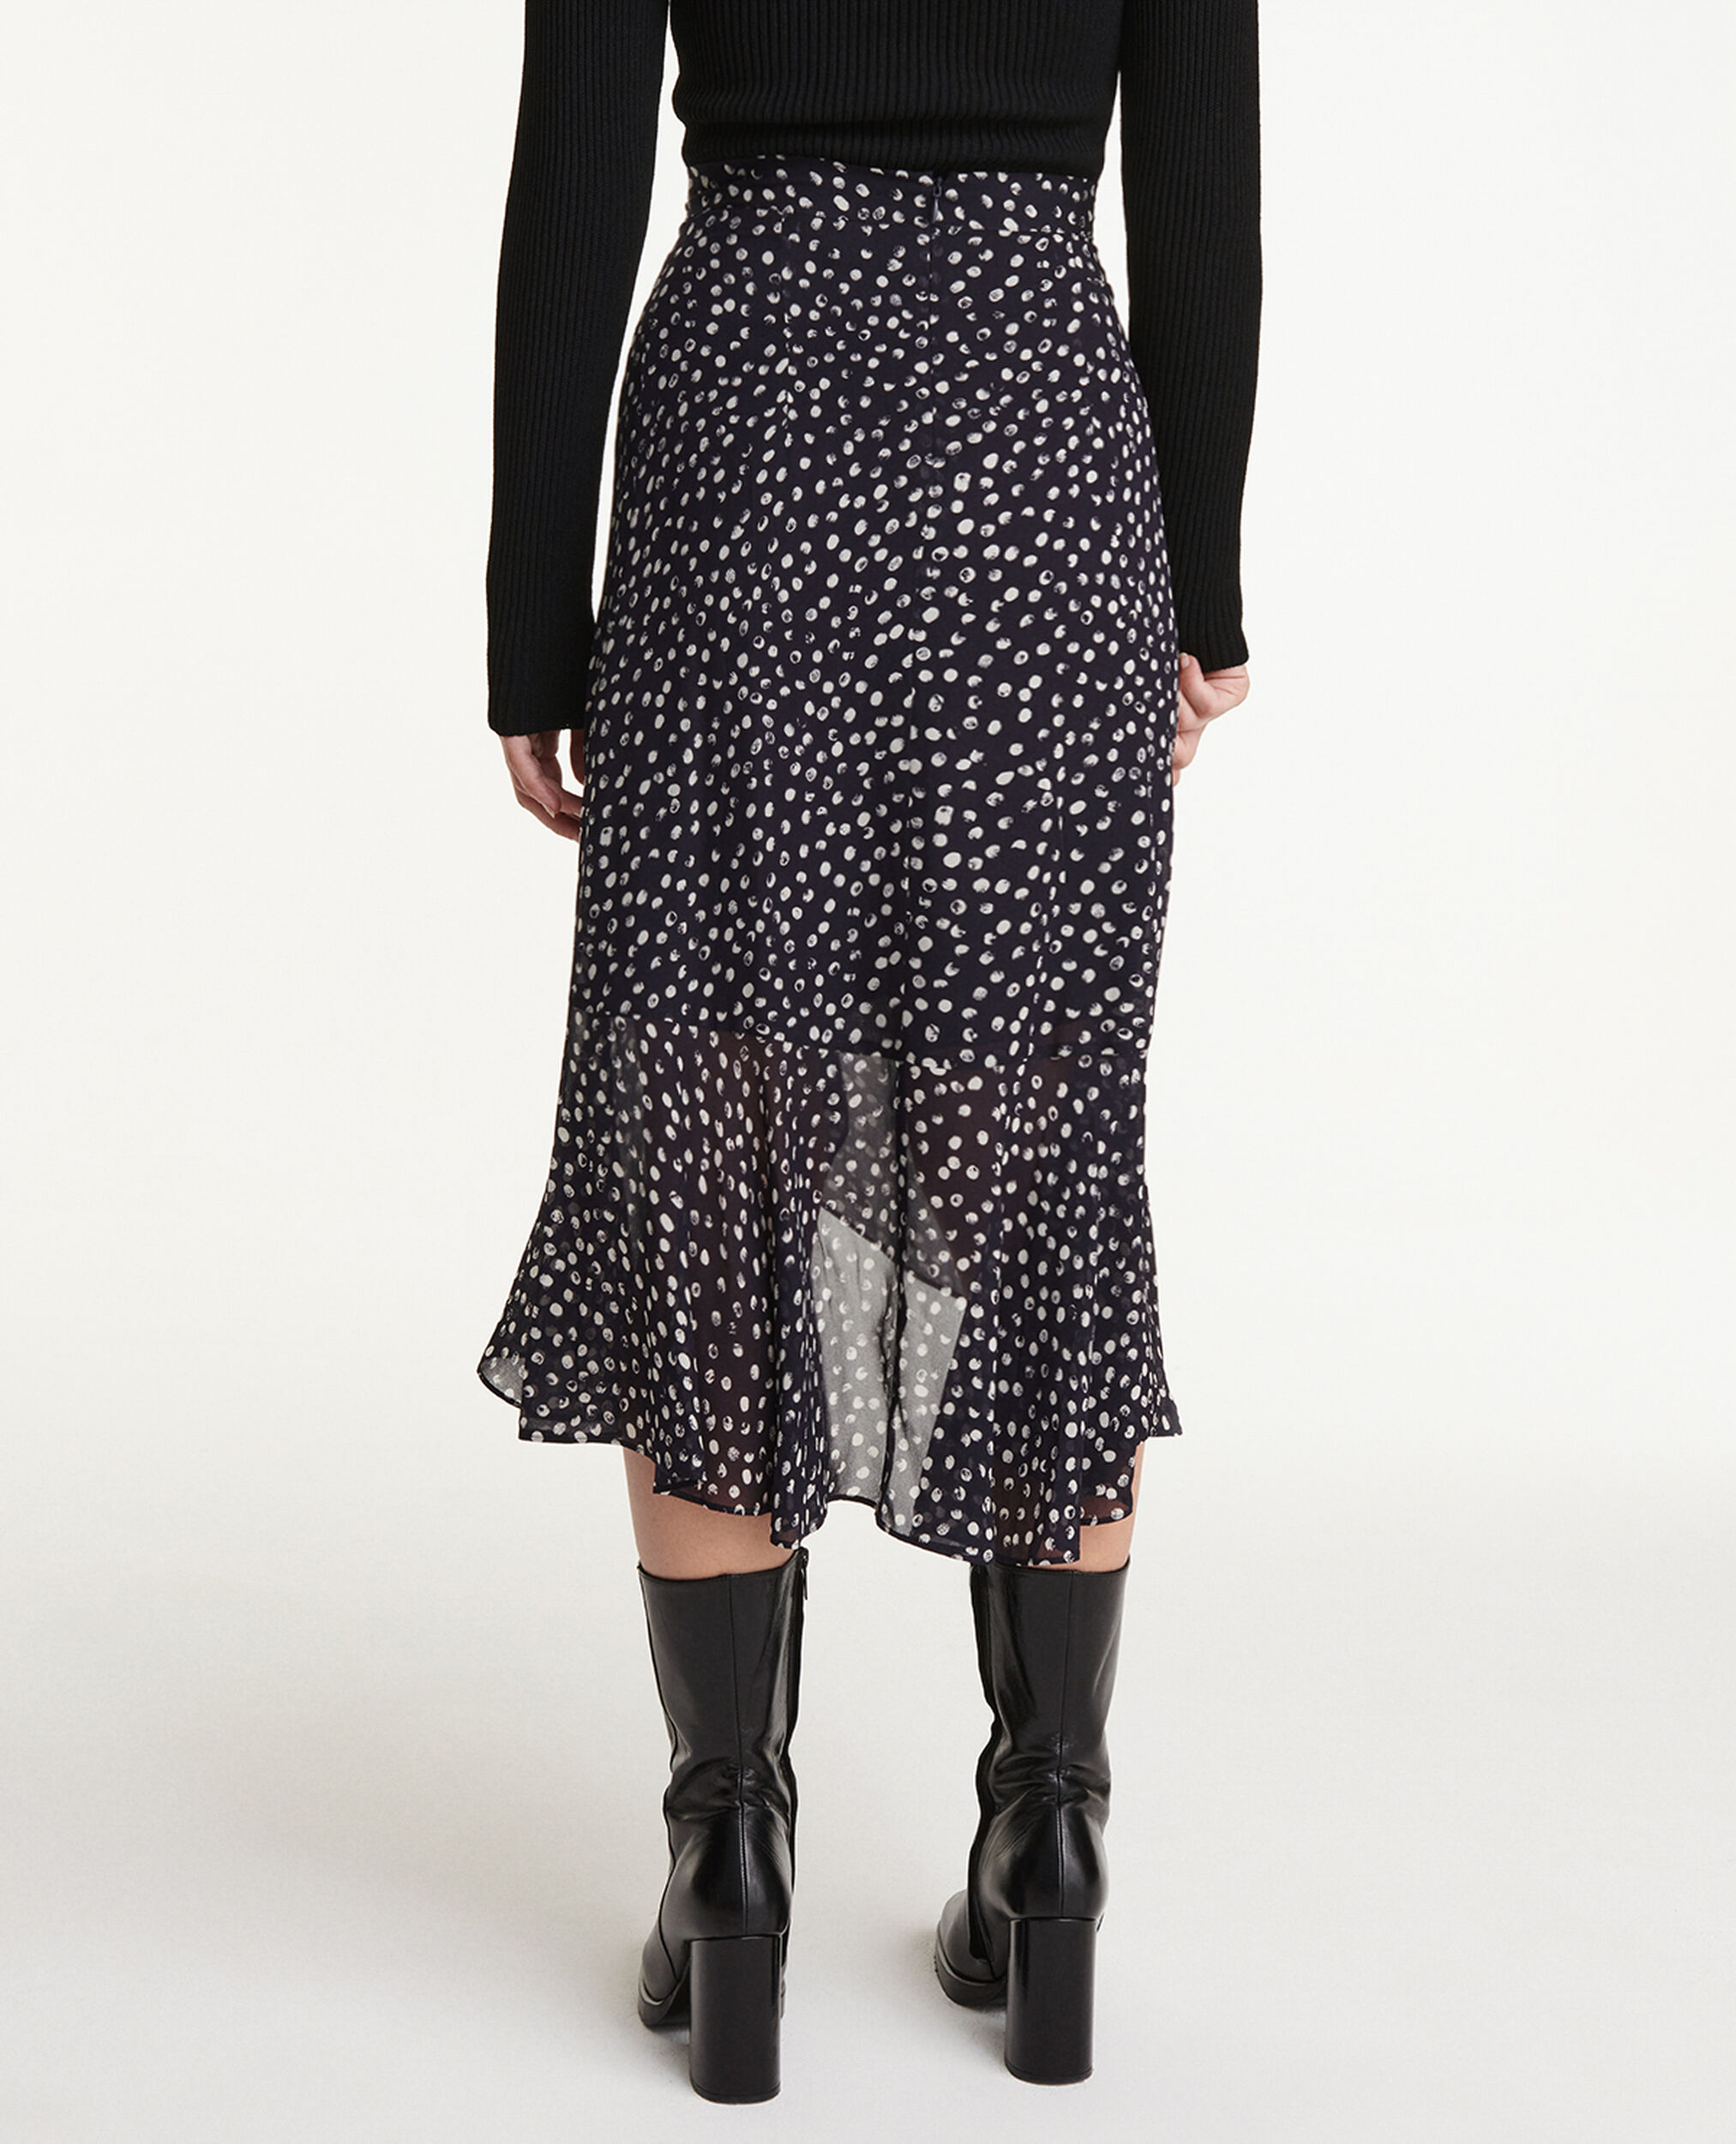 Long flowing navy blue skirt with polka dots, NAVY / WHITE, hi-res image number null